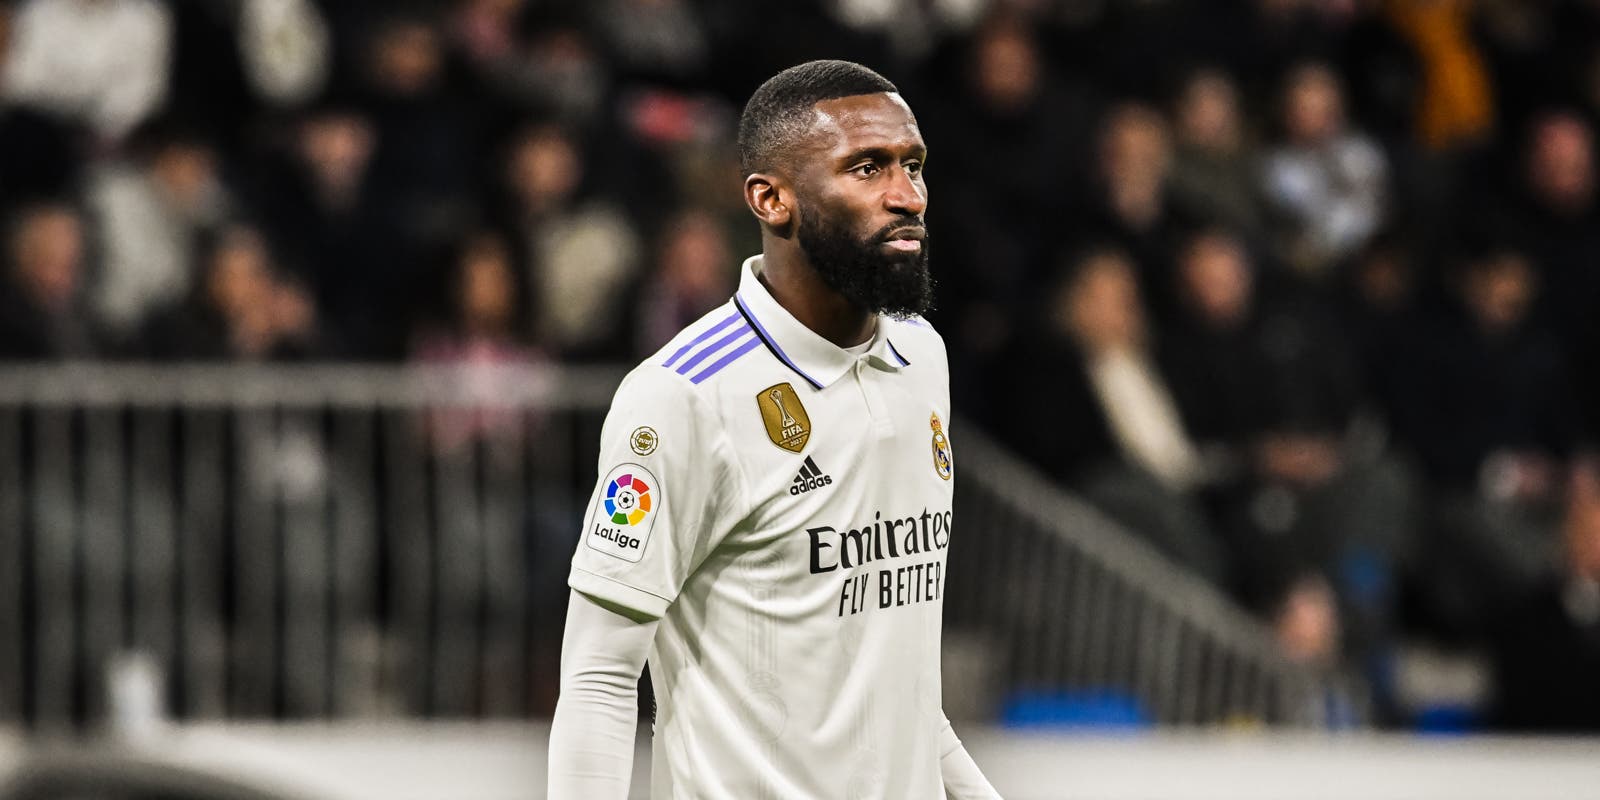 Rudiger demands explanations from Ancelotti: future at Real Madrid in doubt
	
